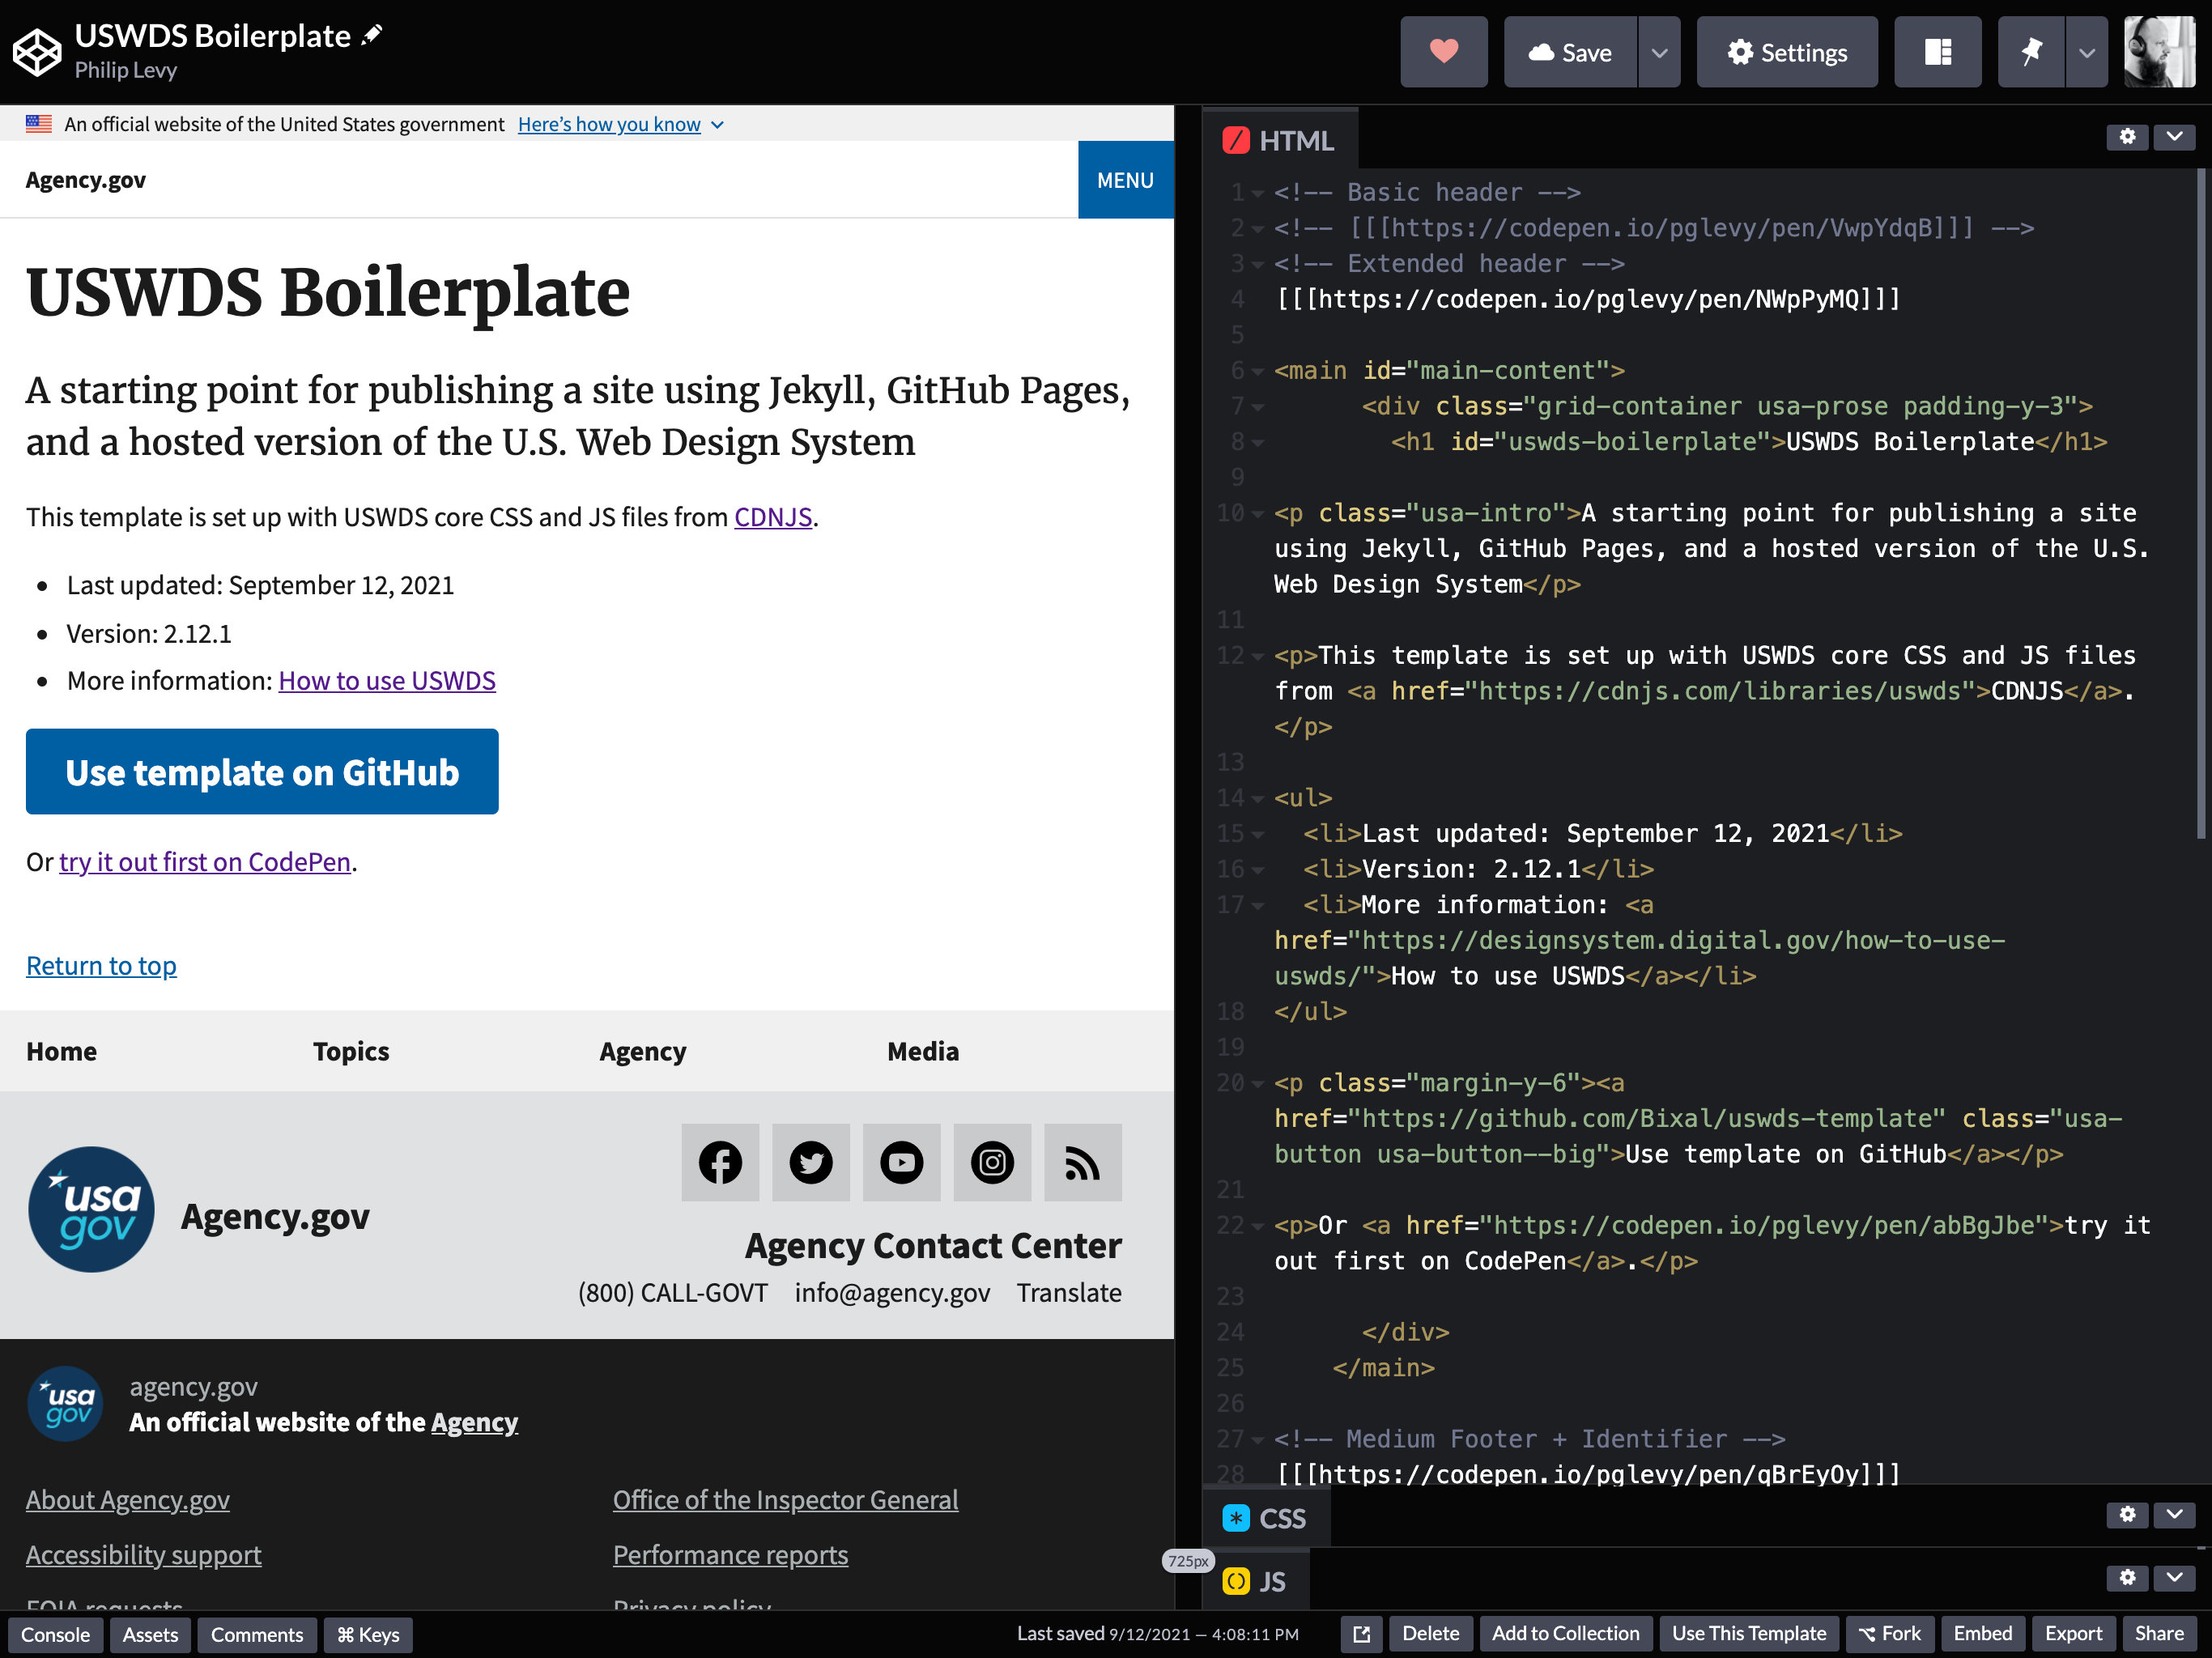 Default view of the USWDS Boilerplate pen on CodePen